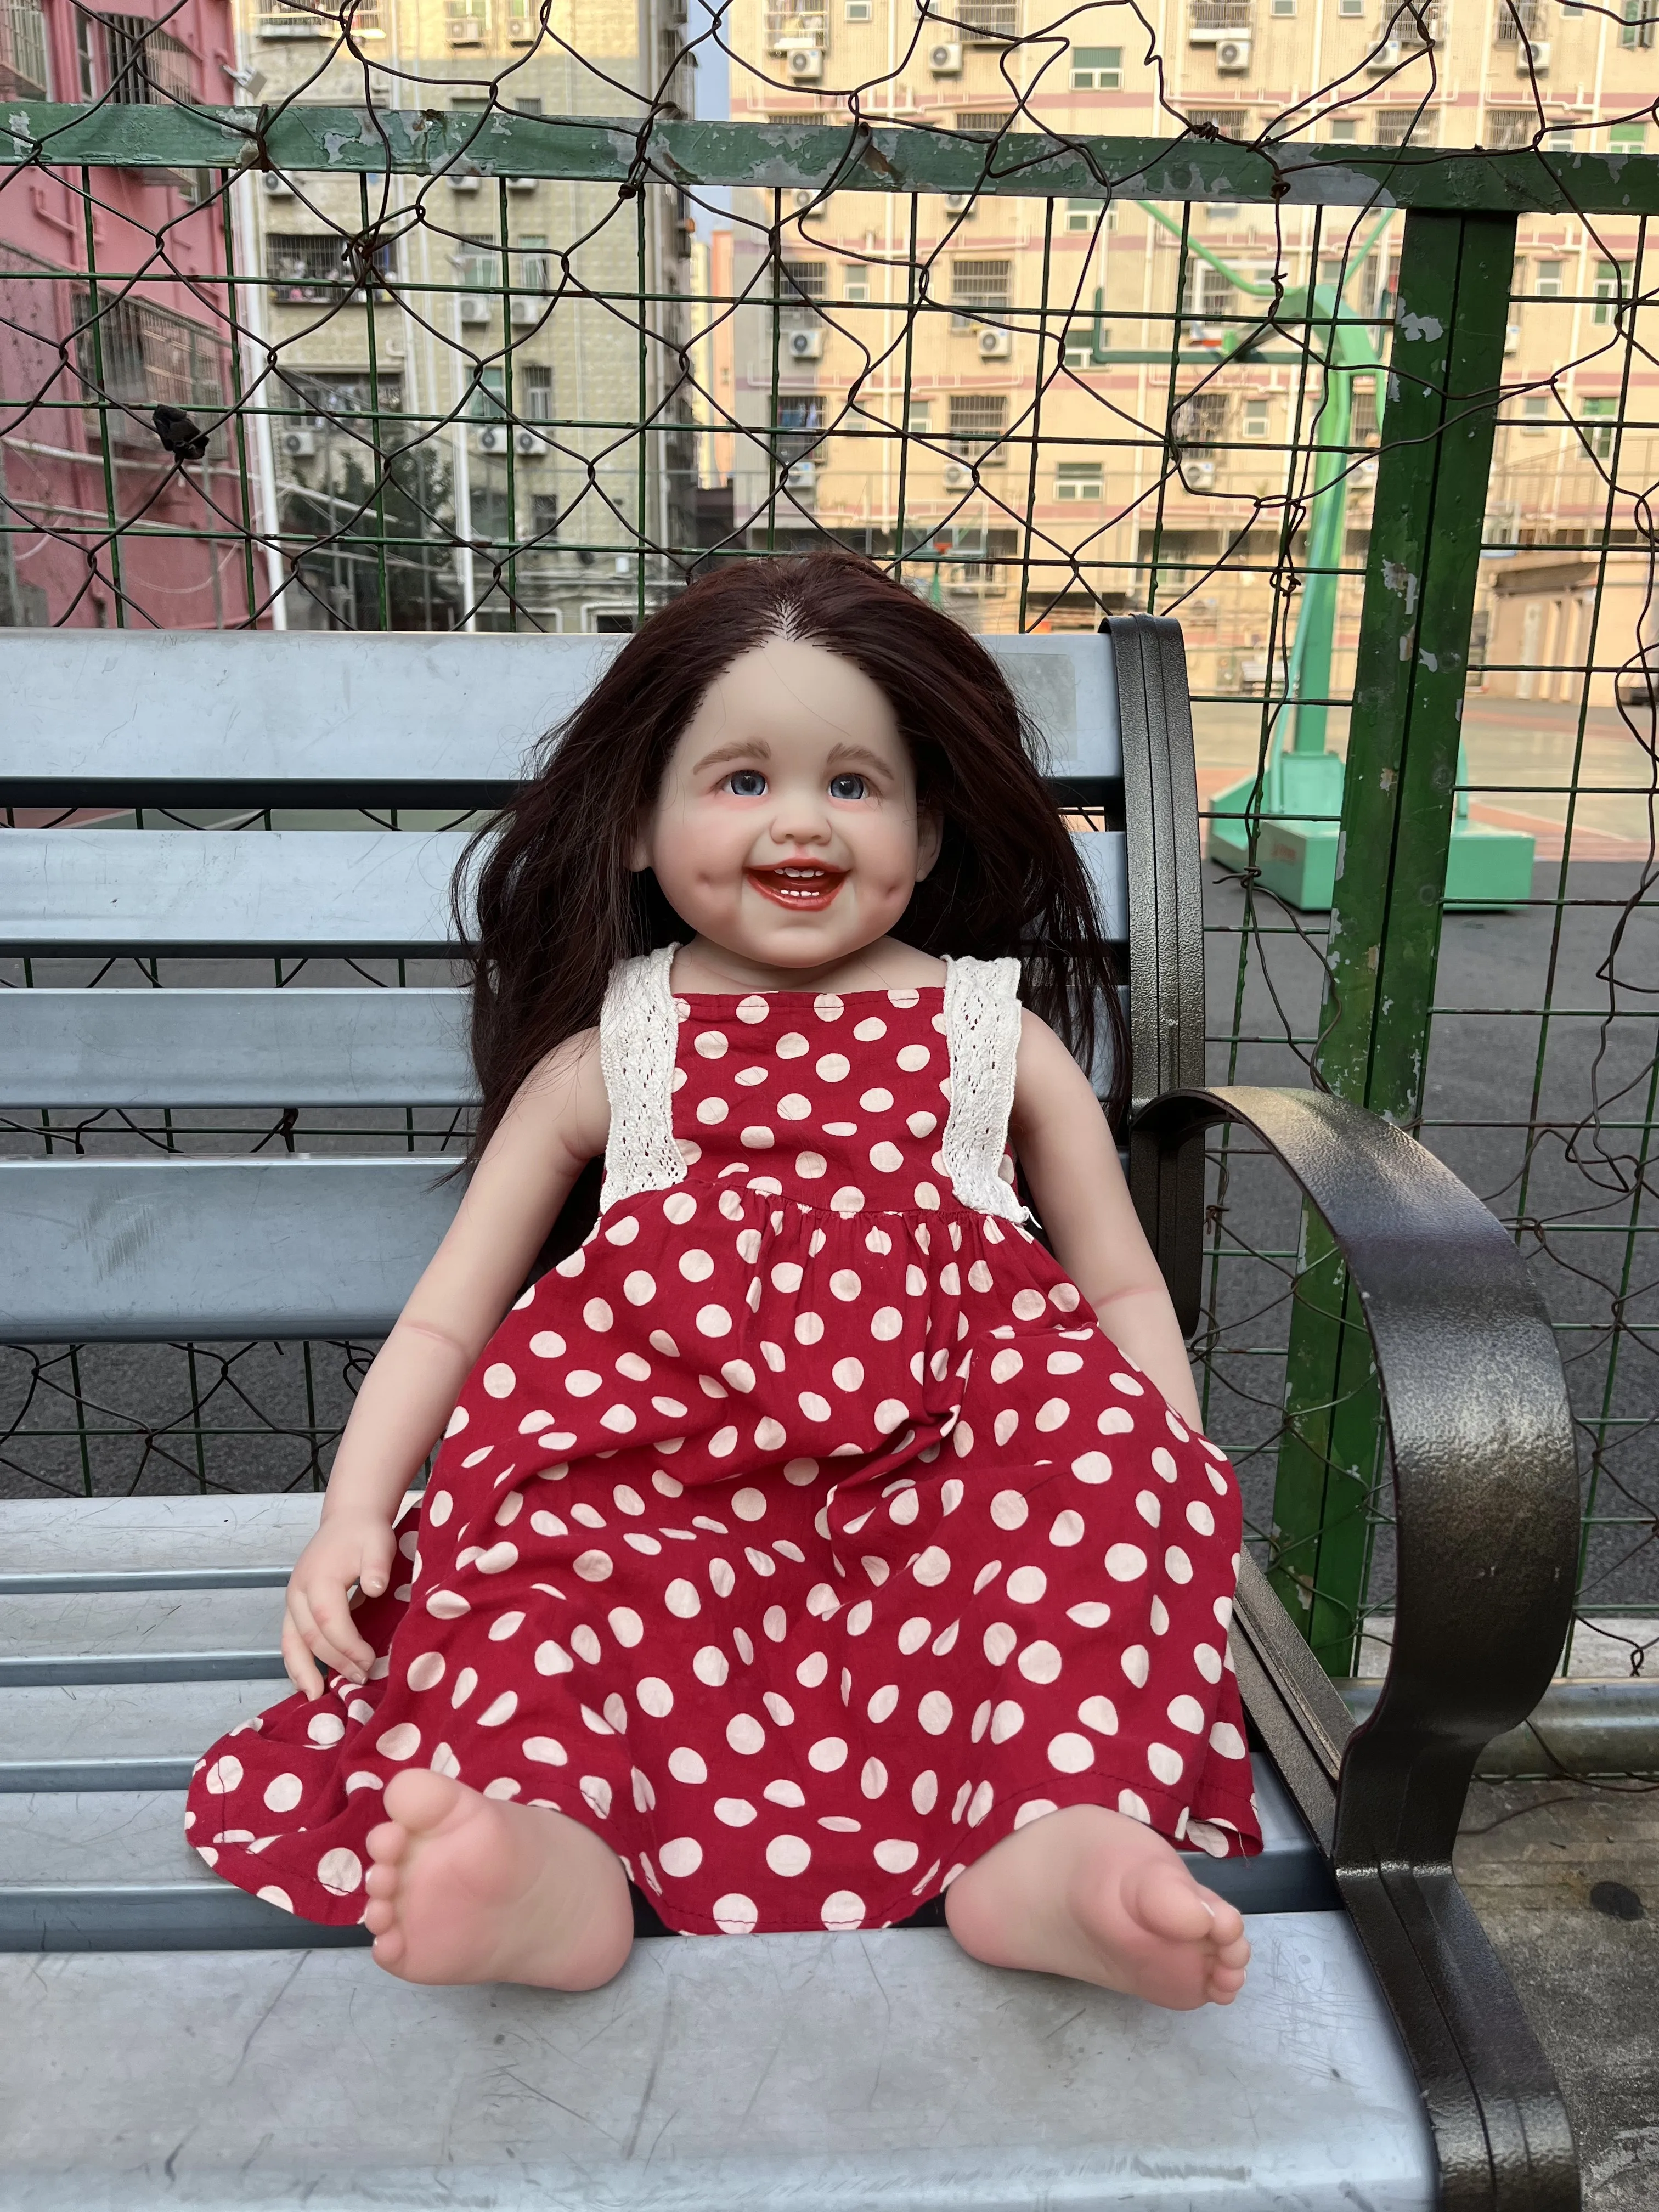 FBBD Customized Limited Supply 32inch Rebron Baby Dimple With Hand-Rooted Long Brown Curly Hair Alredady Finished Doll [in stock ]fbbd 32inch reborn baby doll cressida unpainted kit lifelike soft touch fresh color diy part with cloth body wit